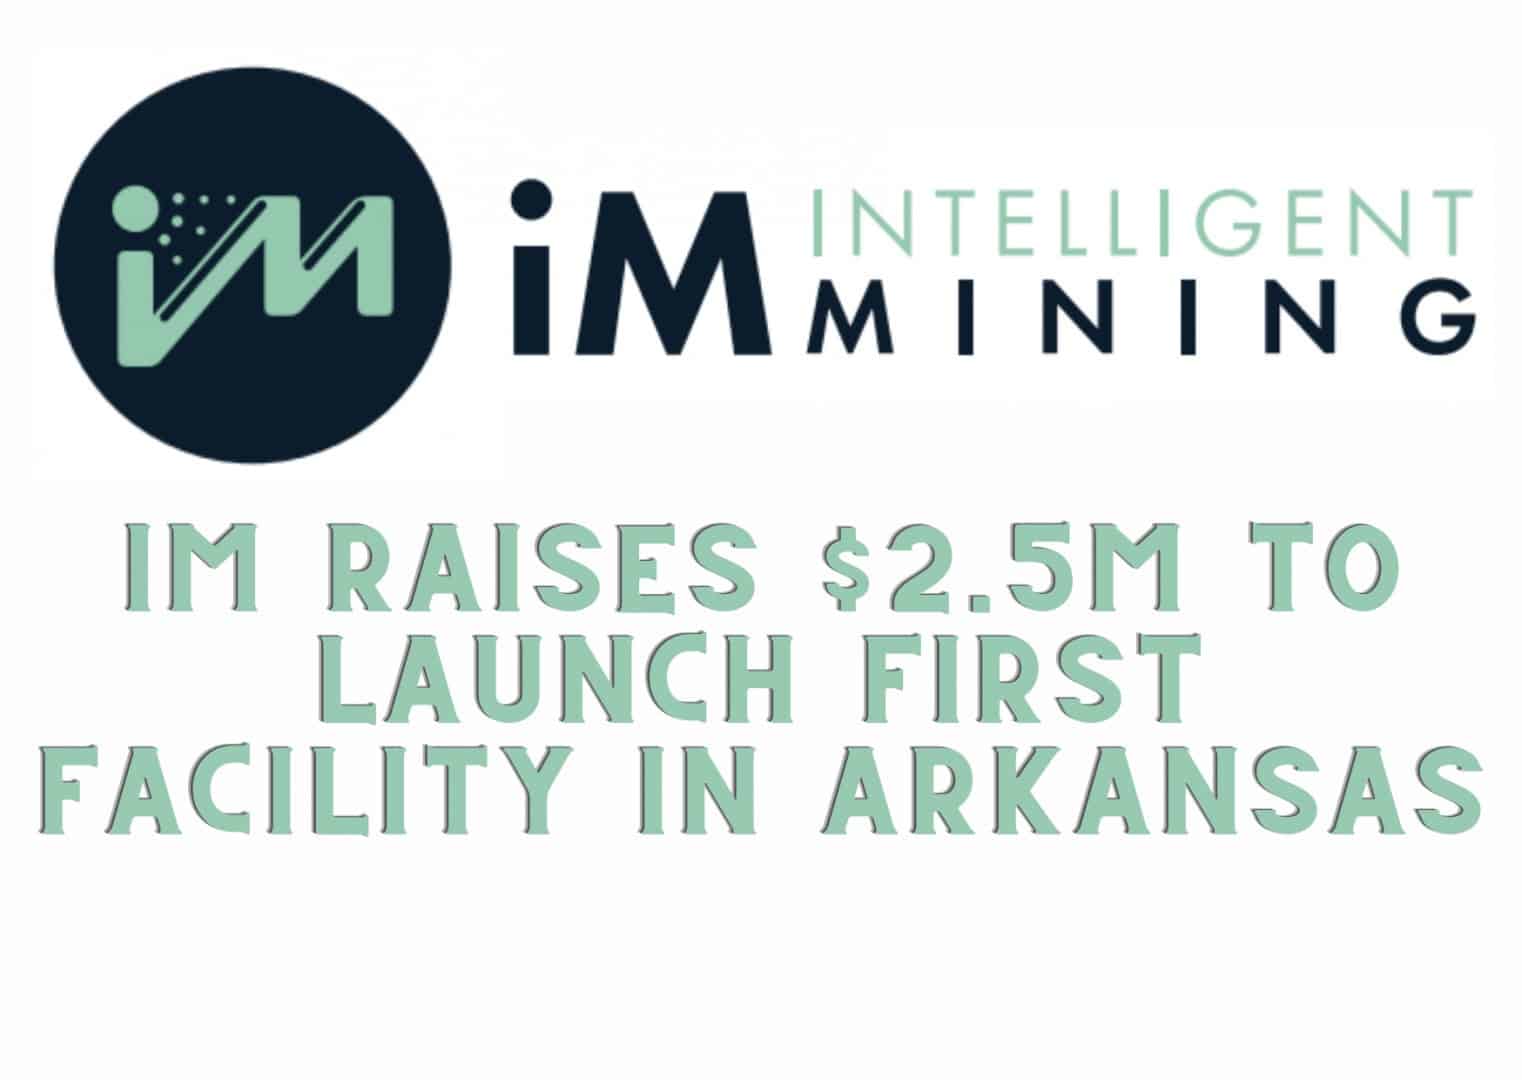 Im-intelligent-mining-raises-$2.5m-to-launch-first-facility-in-arkansas